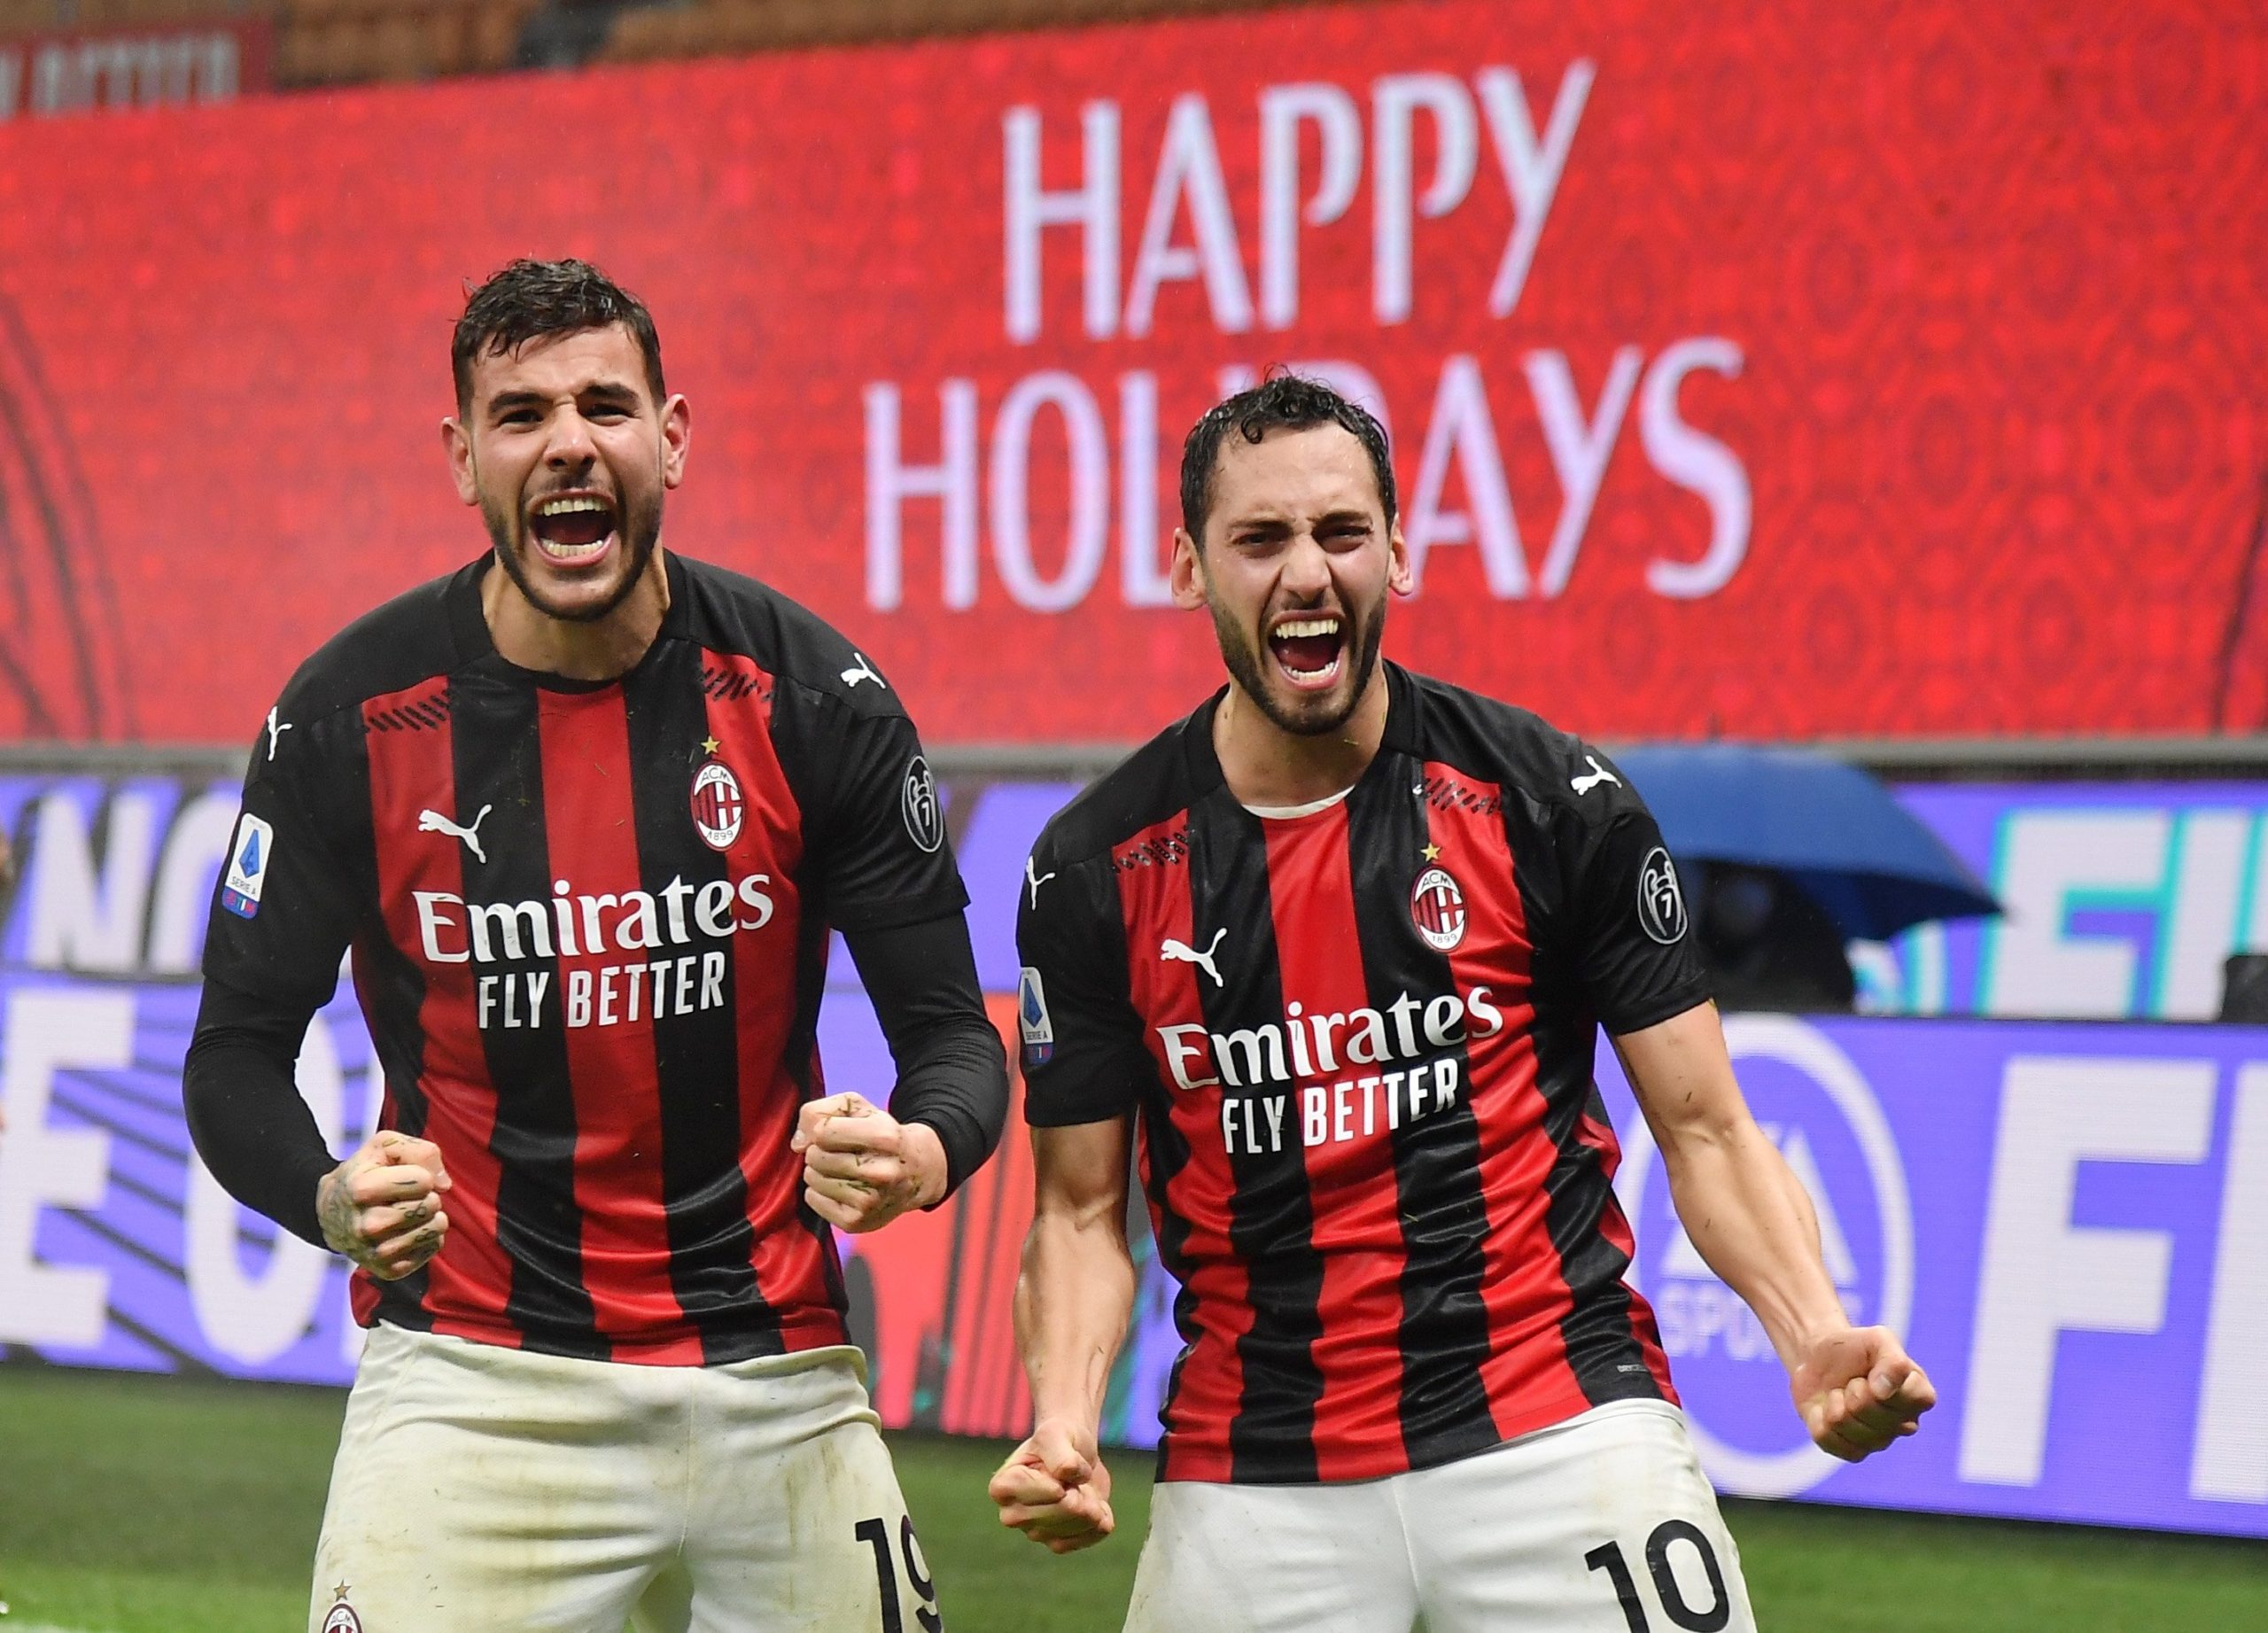 Serie A Matchday 37: Milan – Cagliari Match Preview